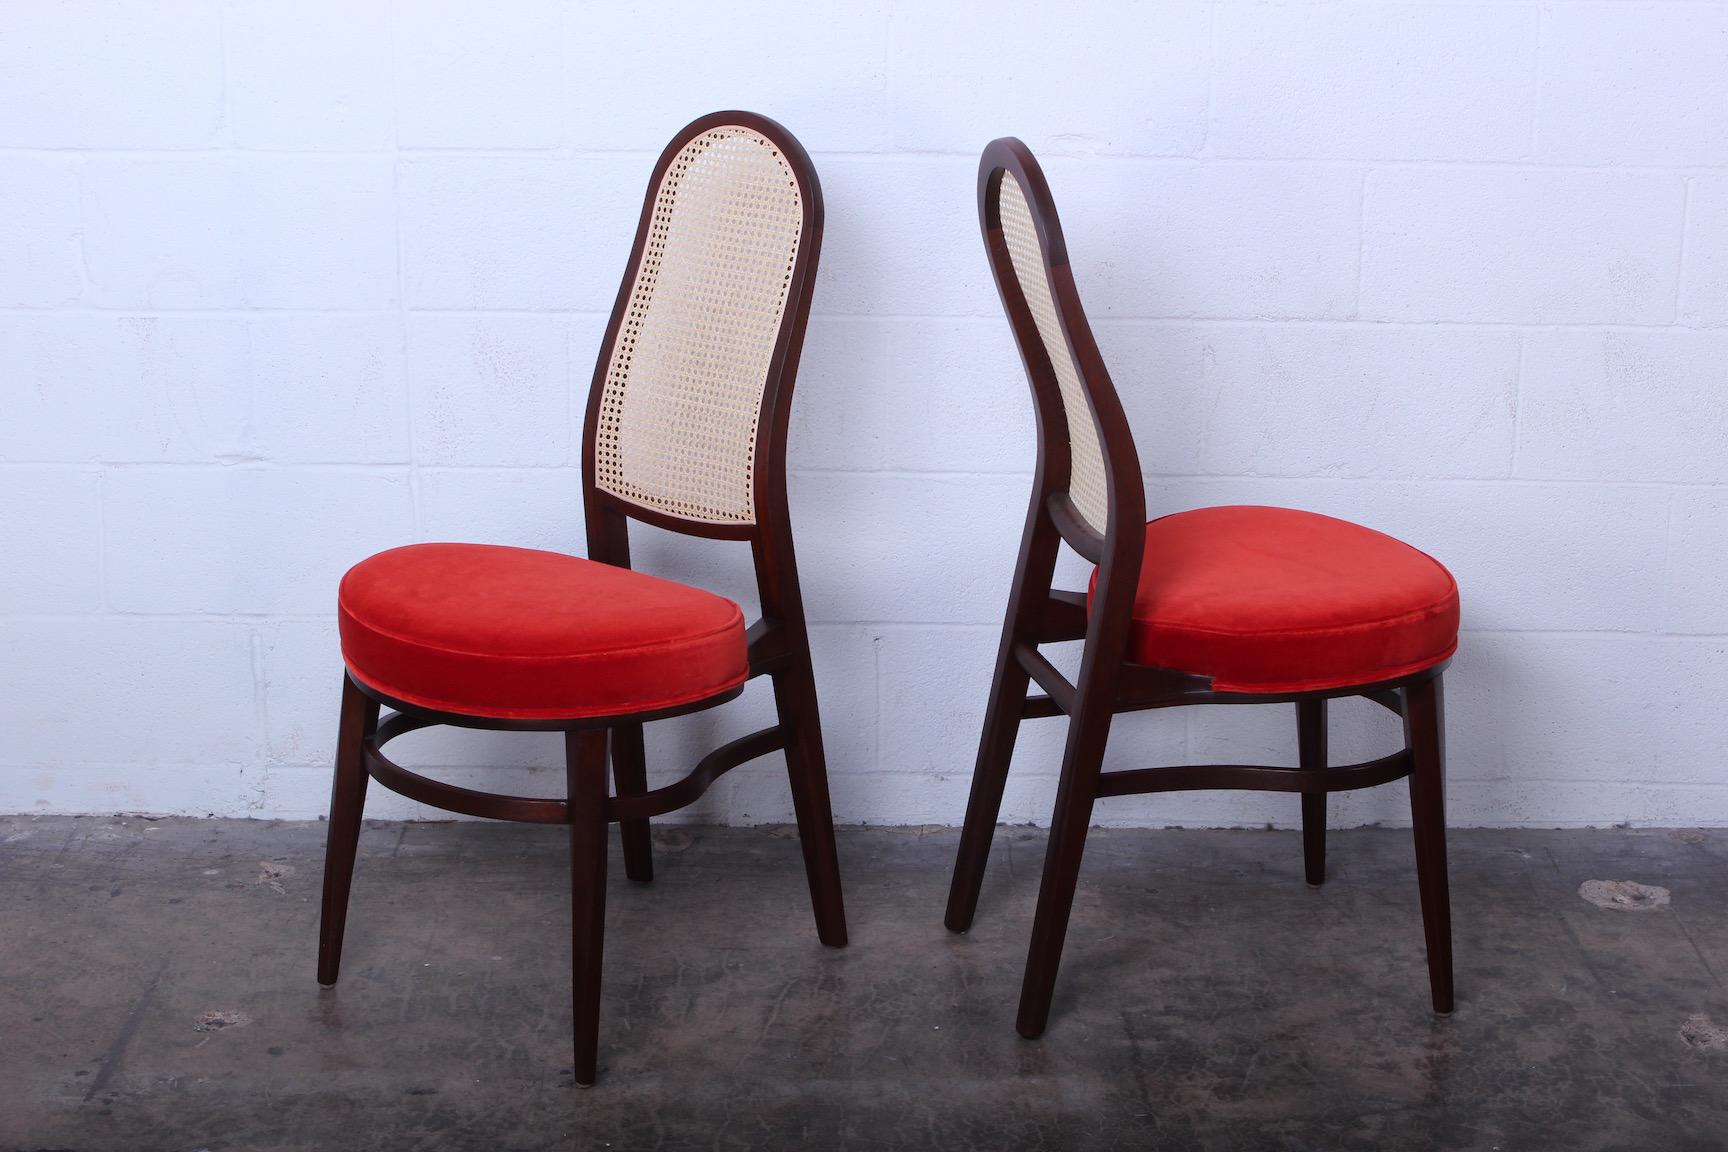 Mid-20th Century Set of Four Dining Chairs by Edward Wormley for Dunbar